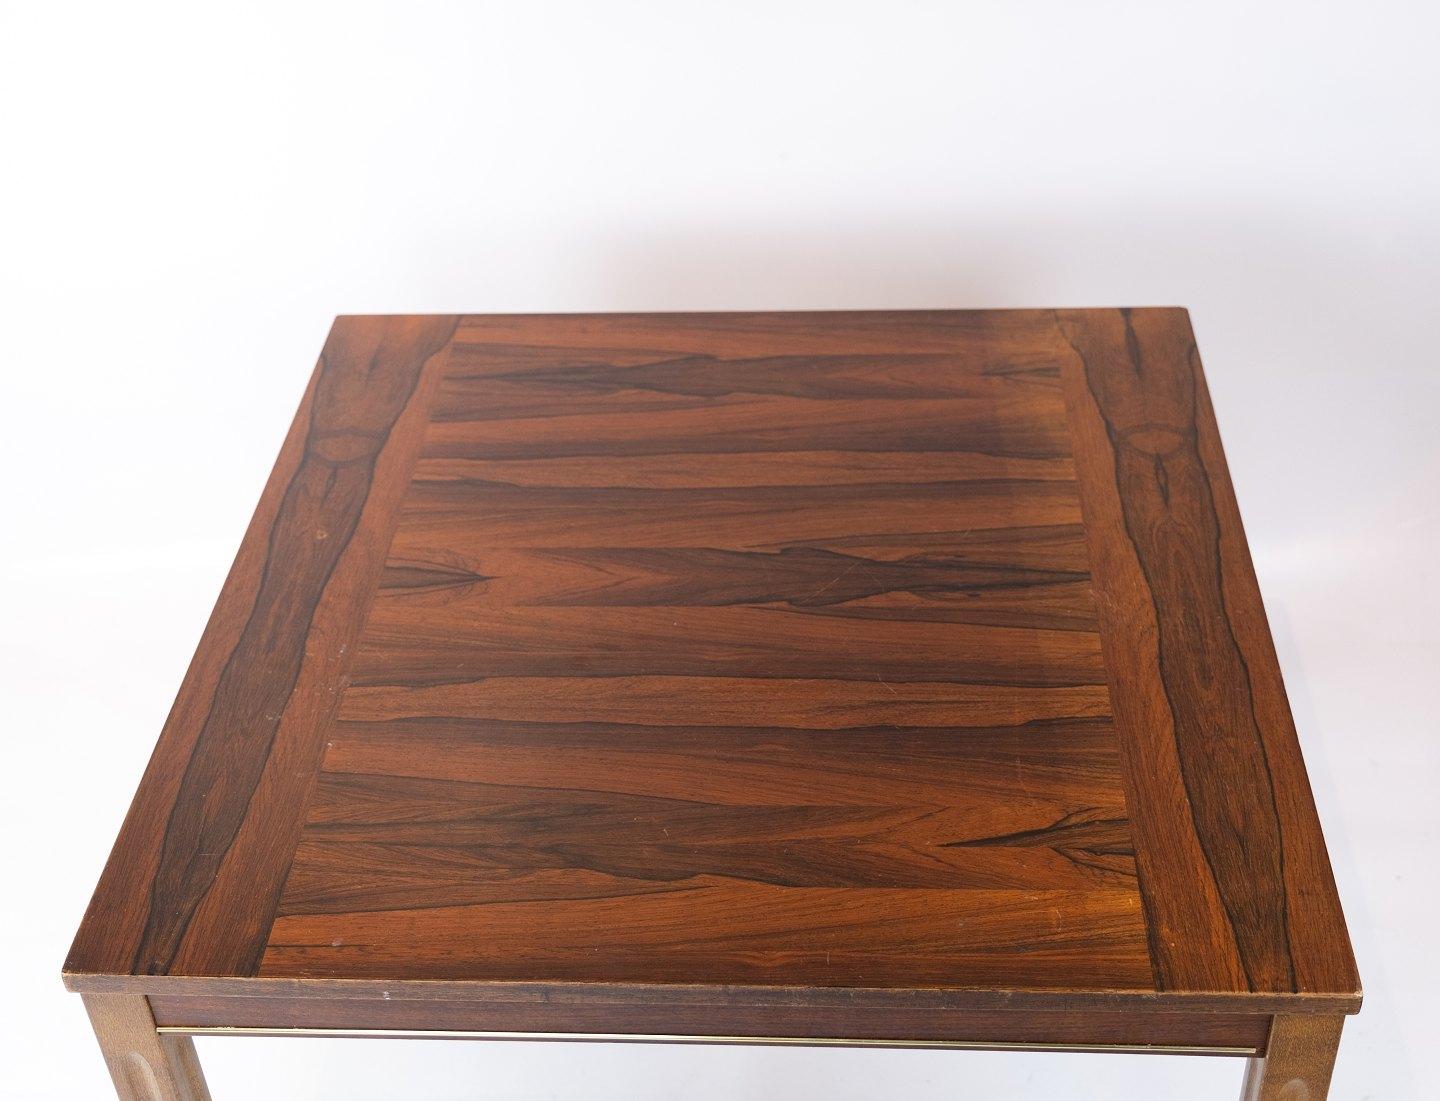 Scandinavian Modern Coffee Table of Rosewood of Danish Design from the 1960s For Sale